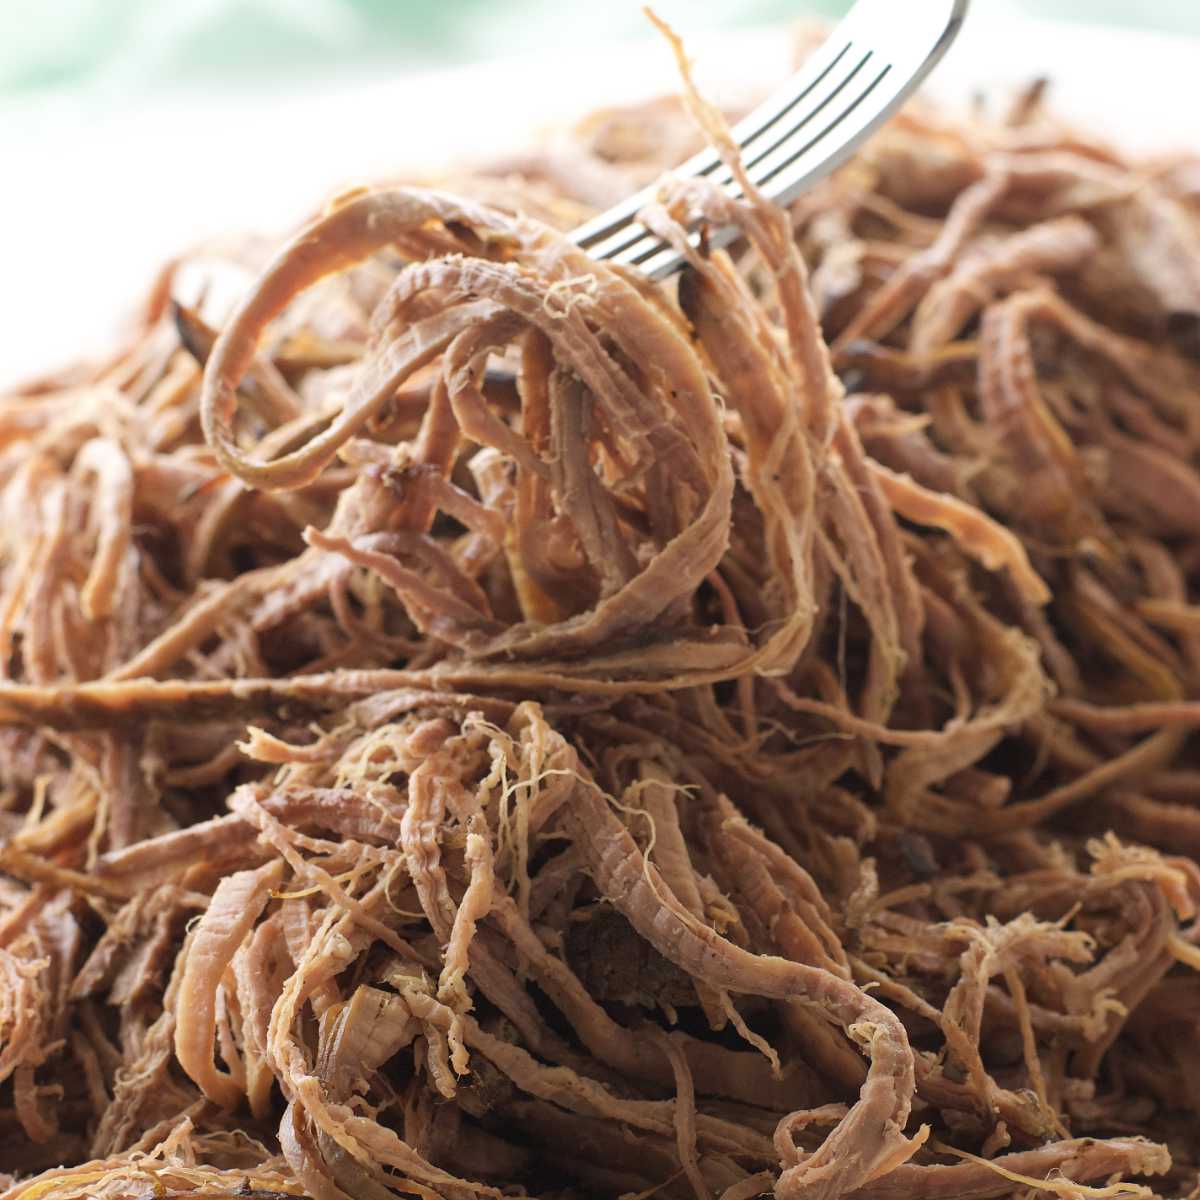 A slow cooker tri tip roast shredded with a fork.